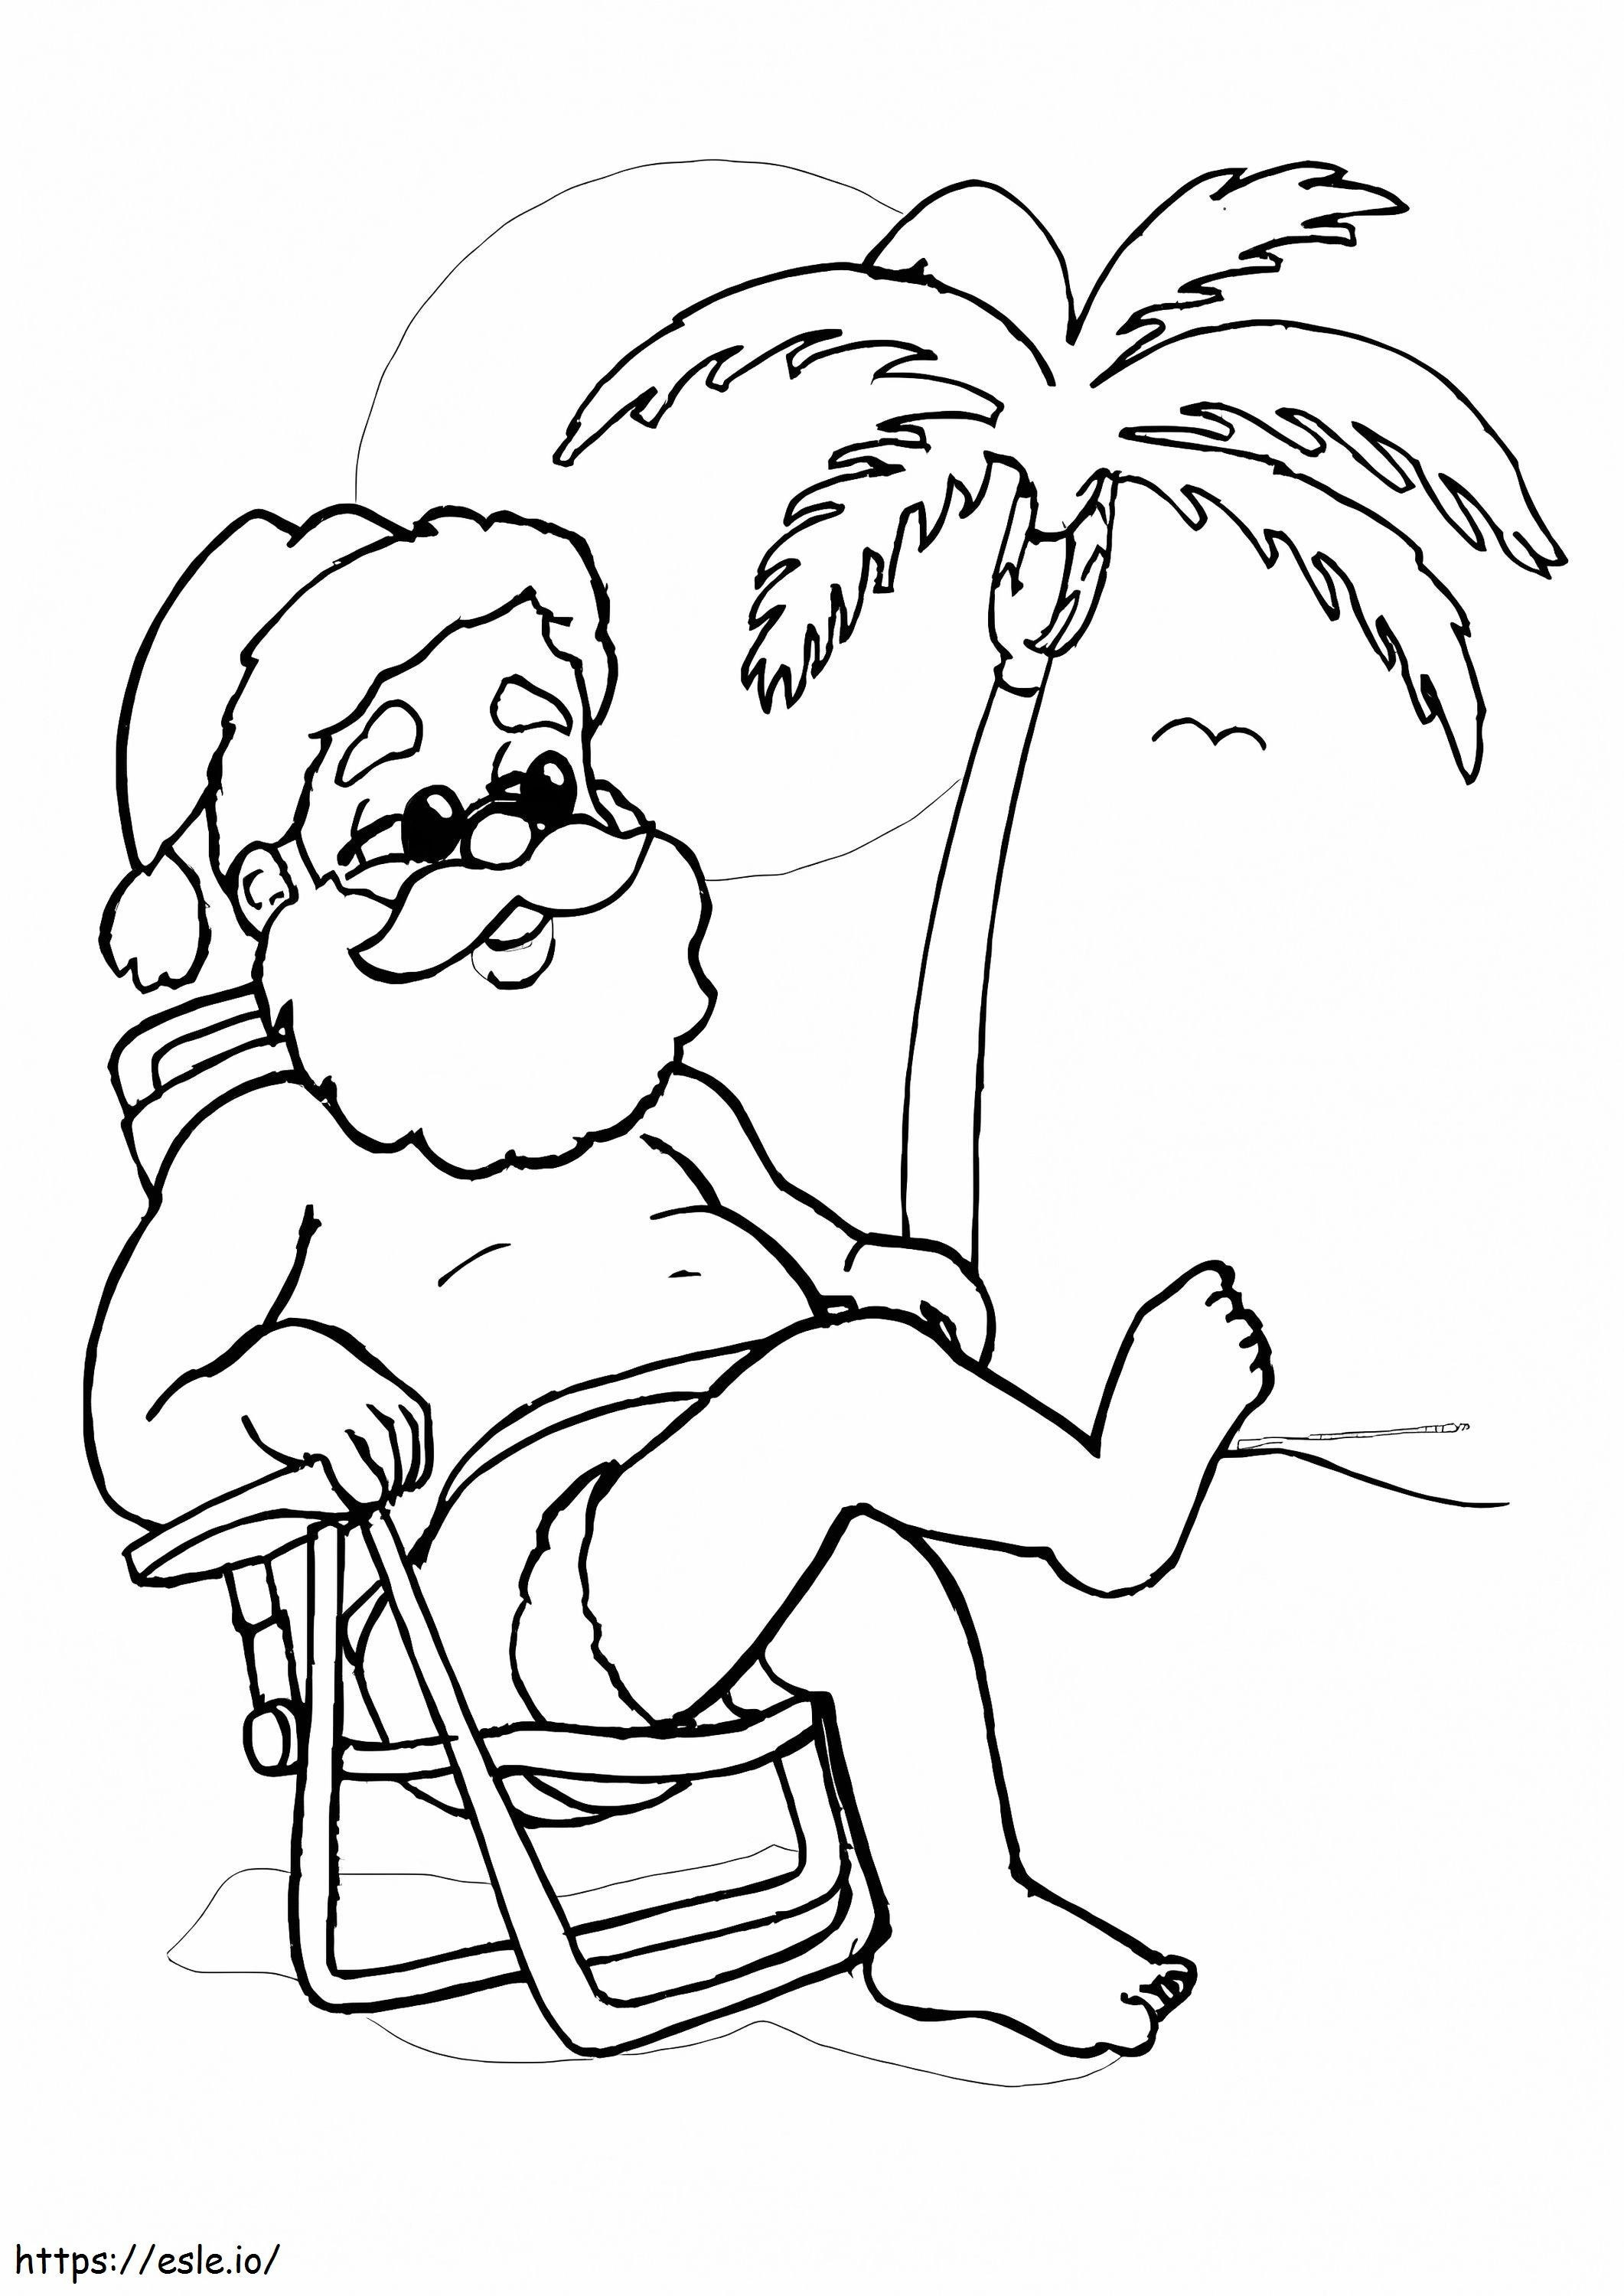 Santa Claus On The Beach coloring page